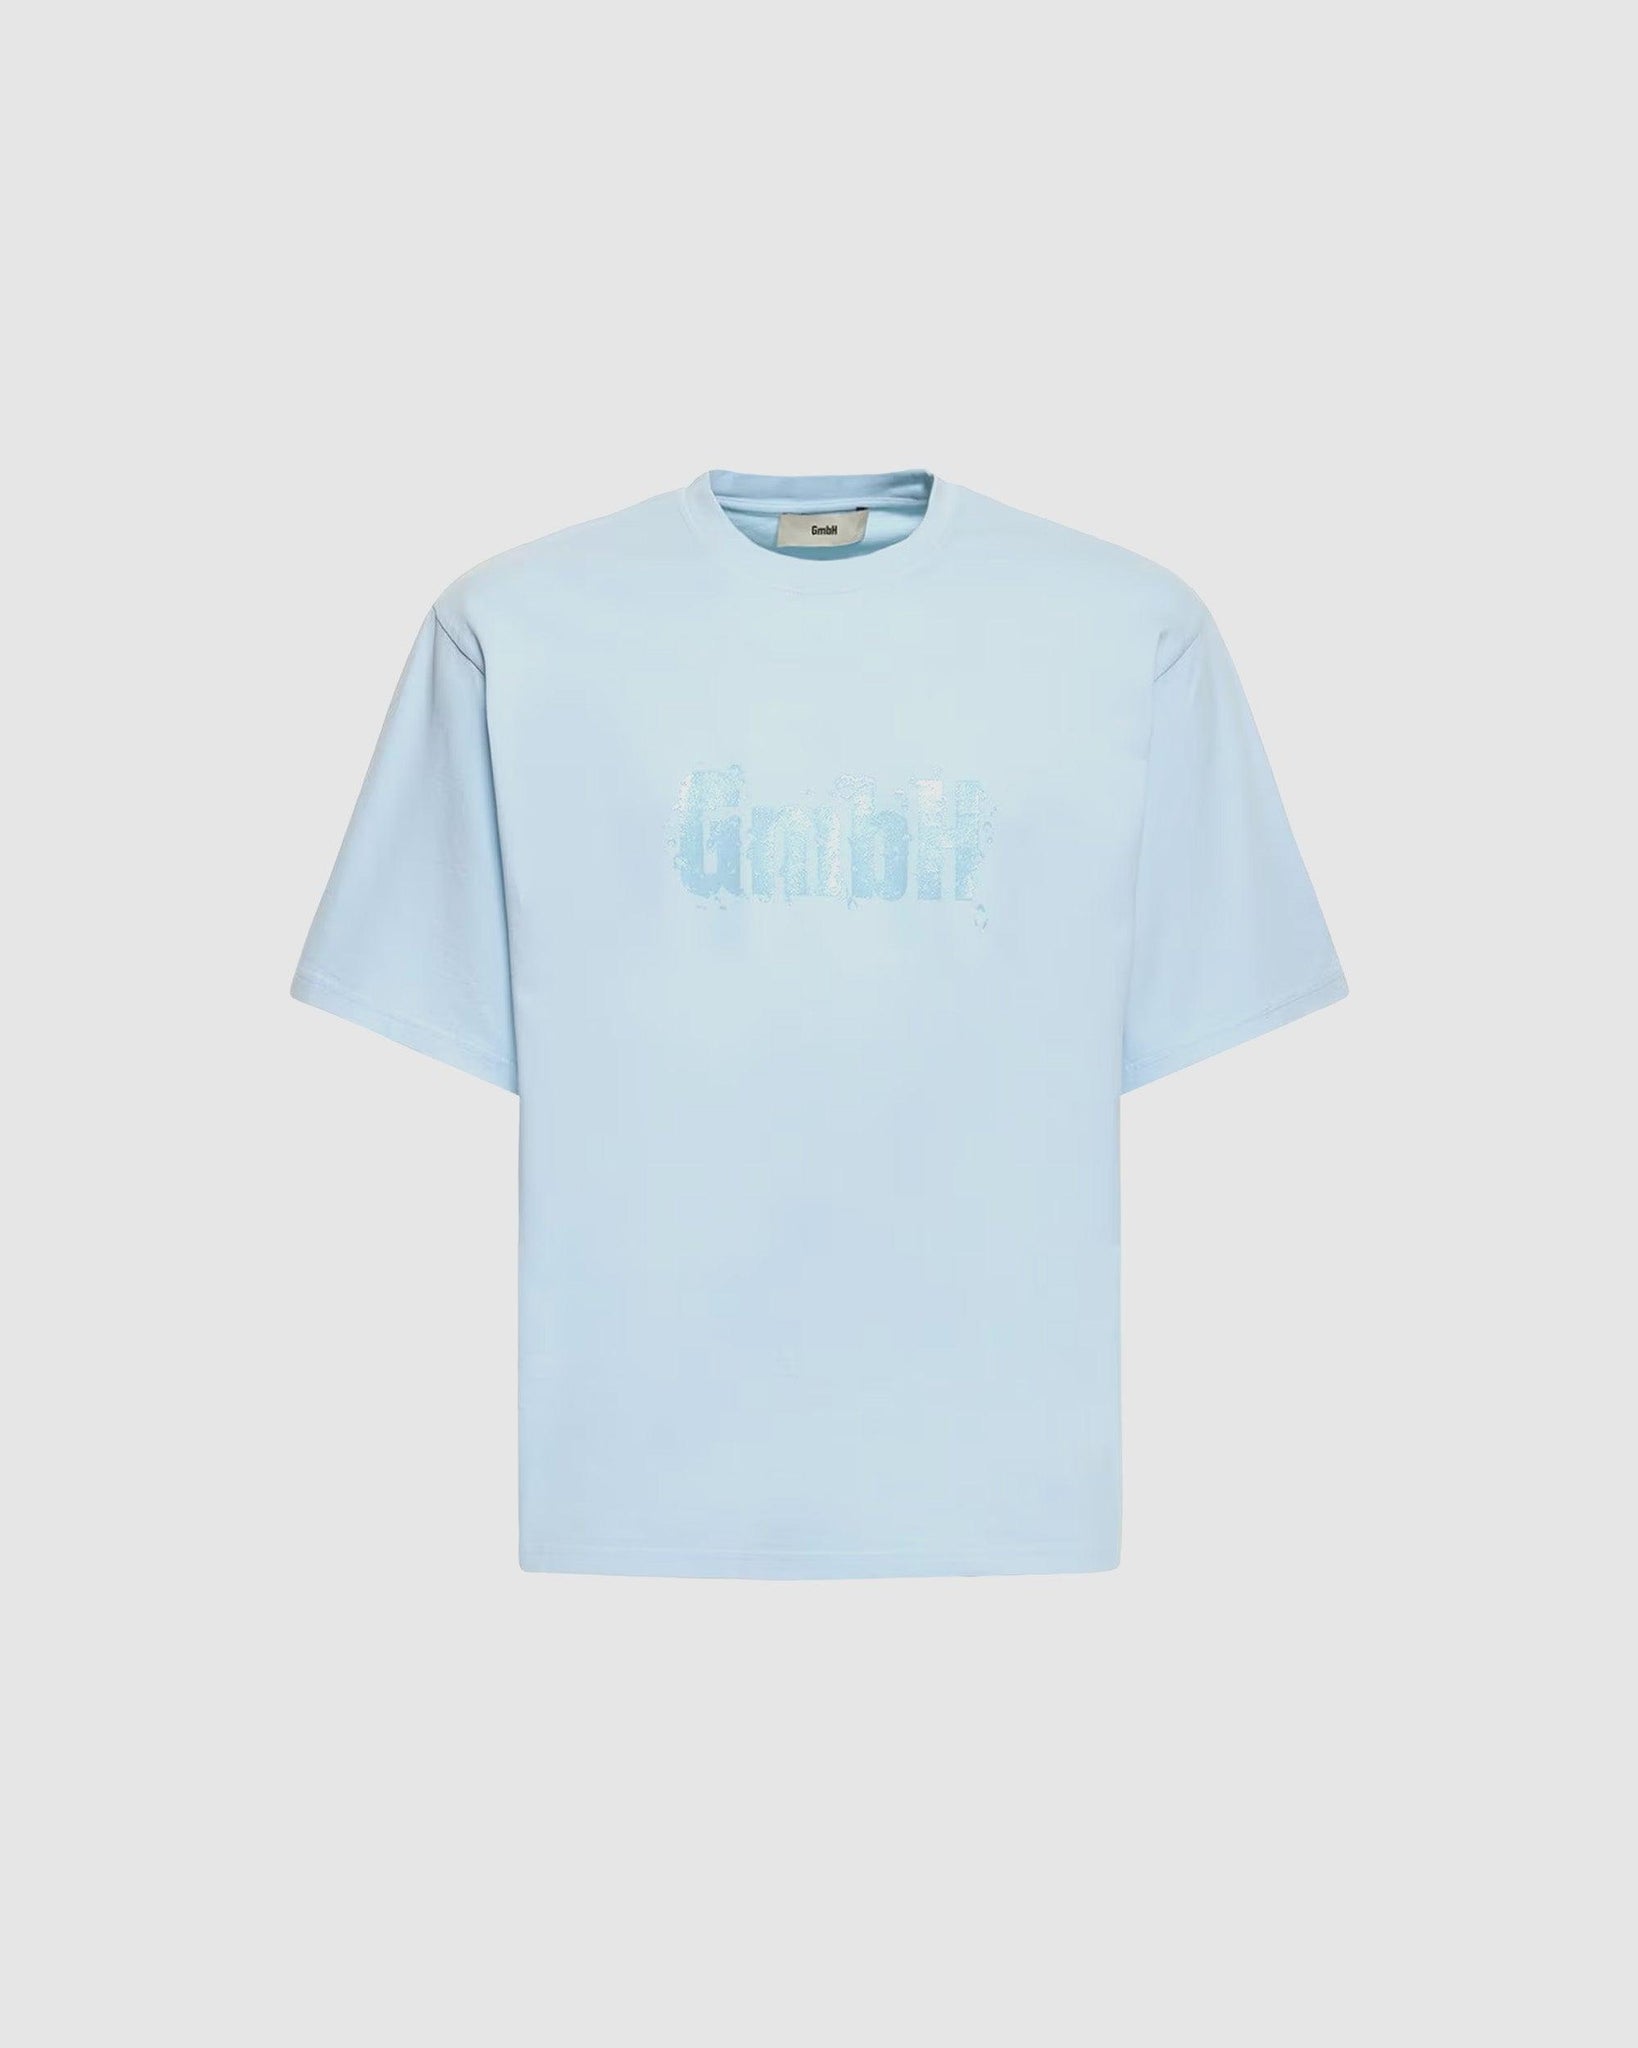 Birk T-Shirt - {{ collection.title }} - Chinatown Country Club 